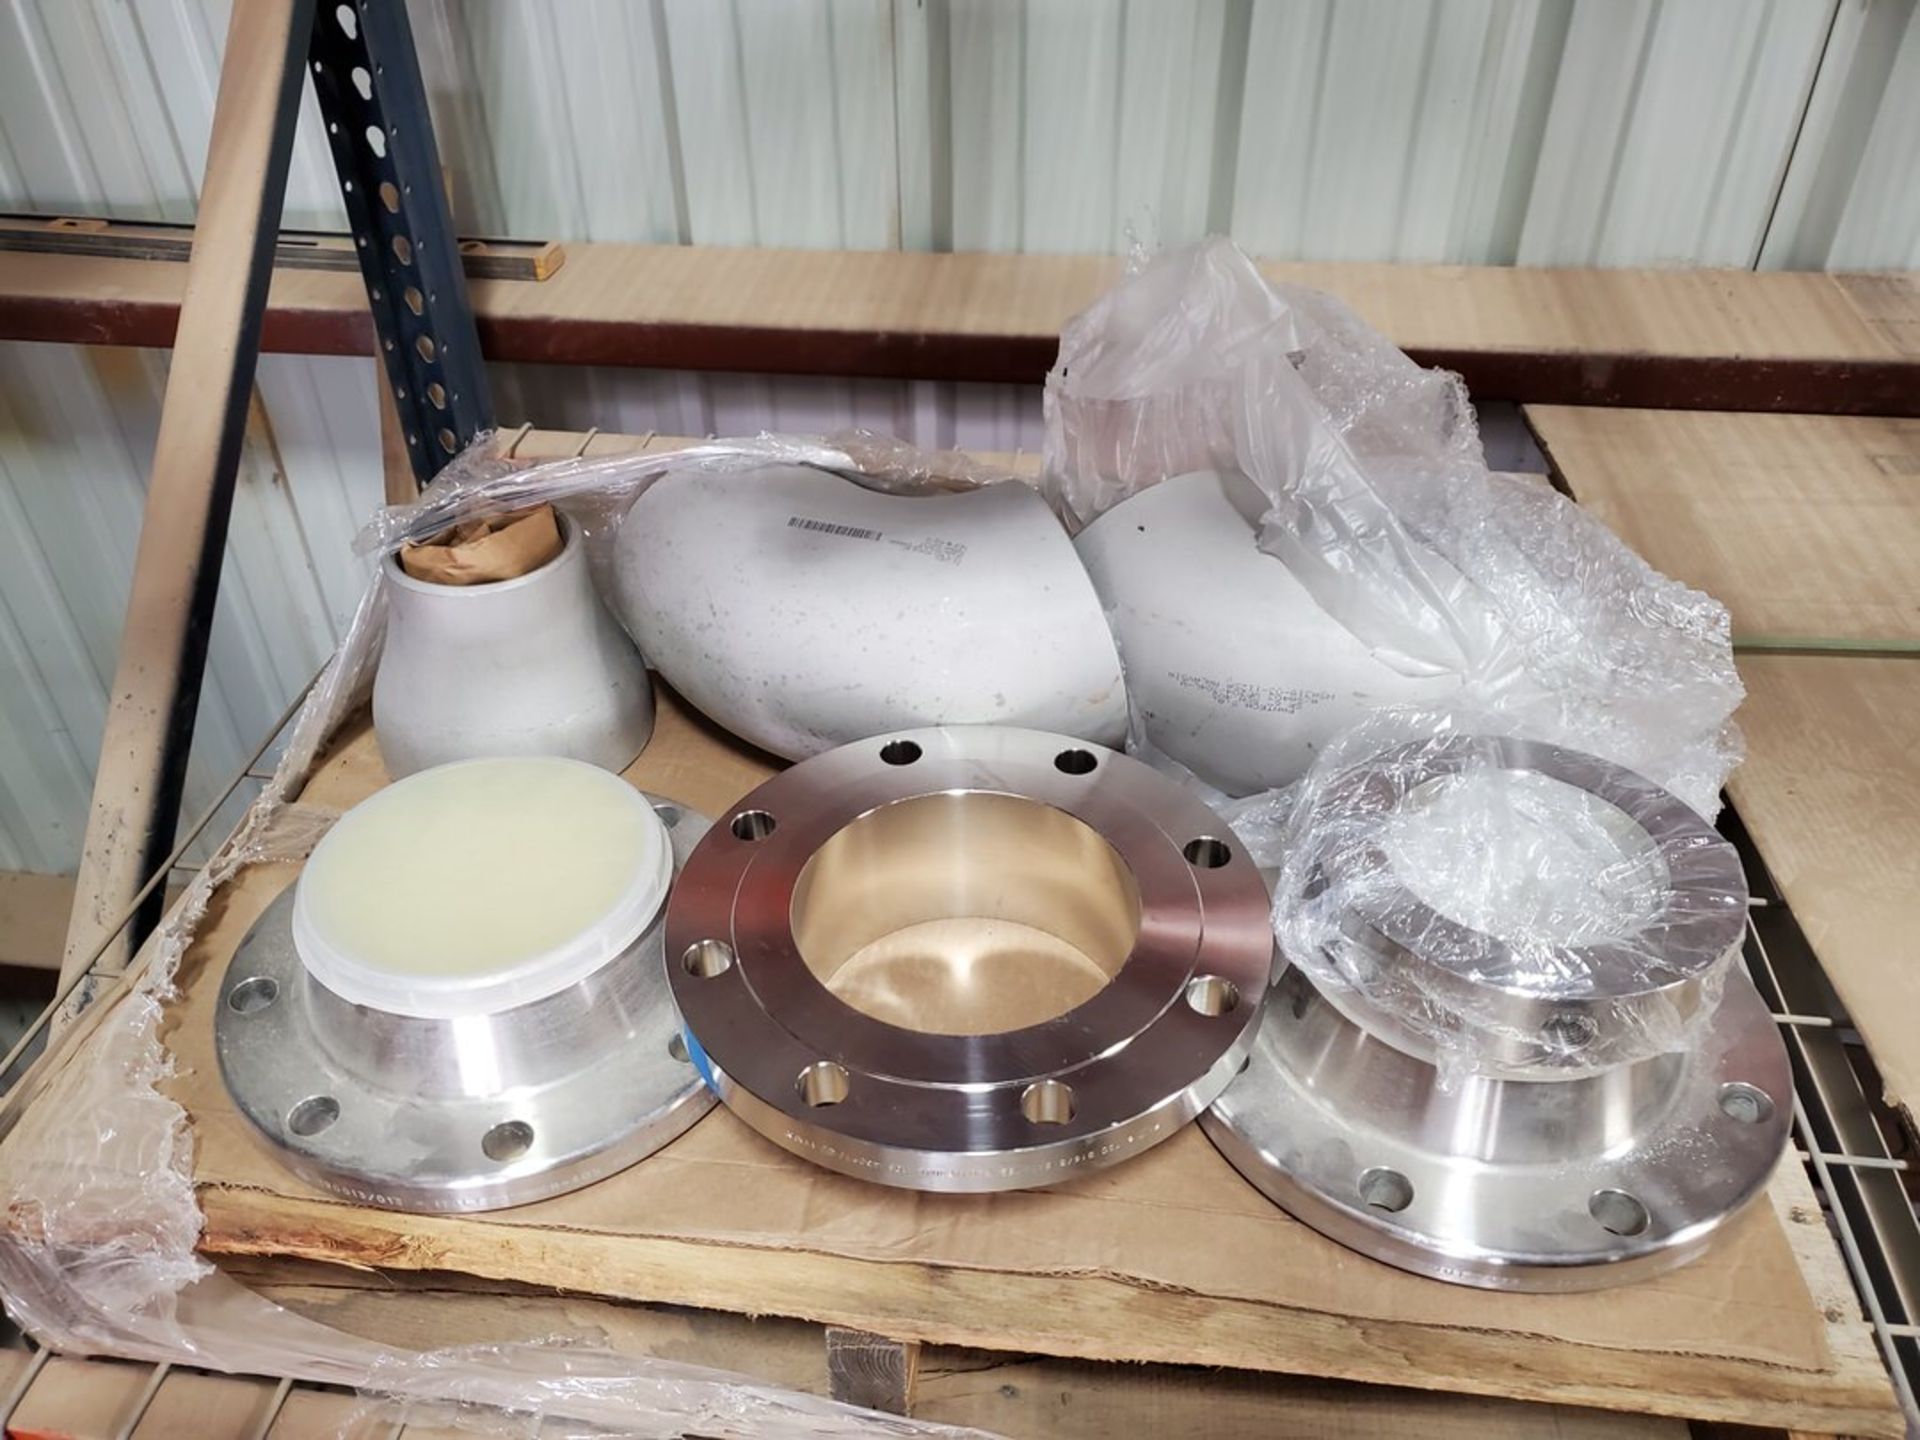 Assorted Fittings (3) 6" 150# Flanges Sch 40, (1) 6" Ell 304 Sch 40S, (1) Reducer, (1) Bleed Ring